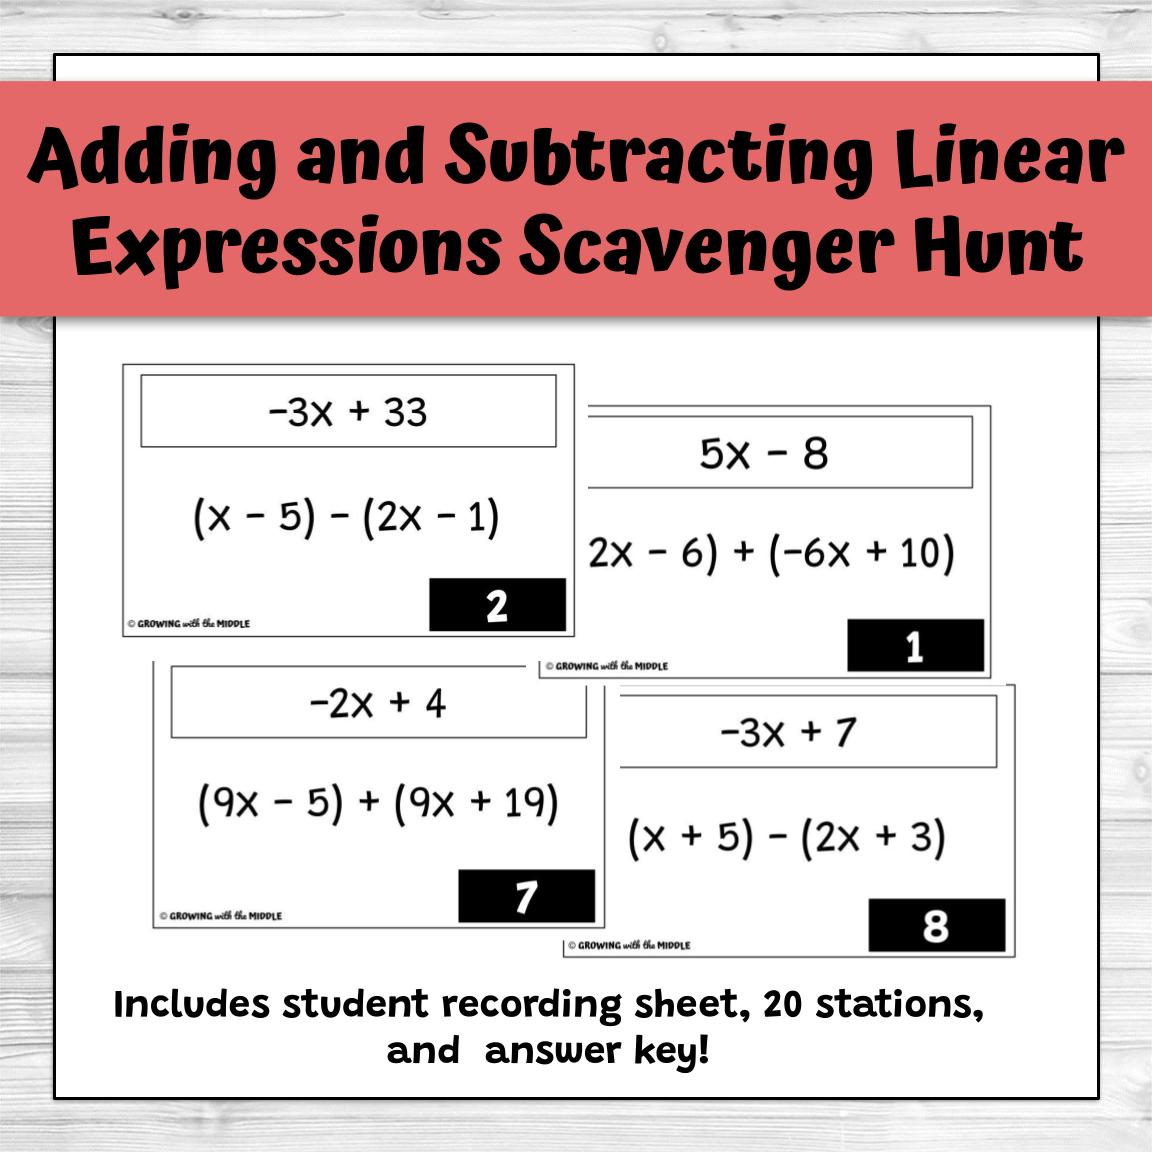 Adding and Subtracting Linear Expressions Scavenger Hunt